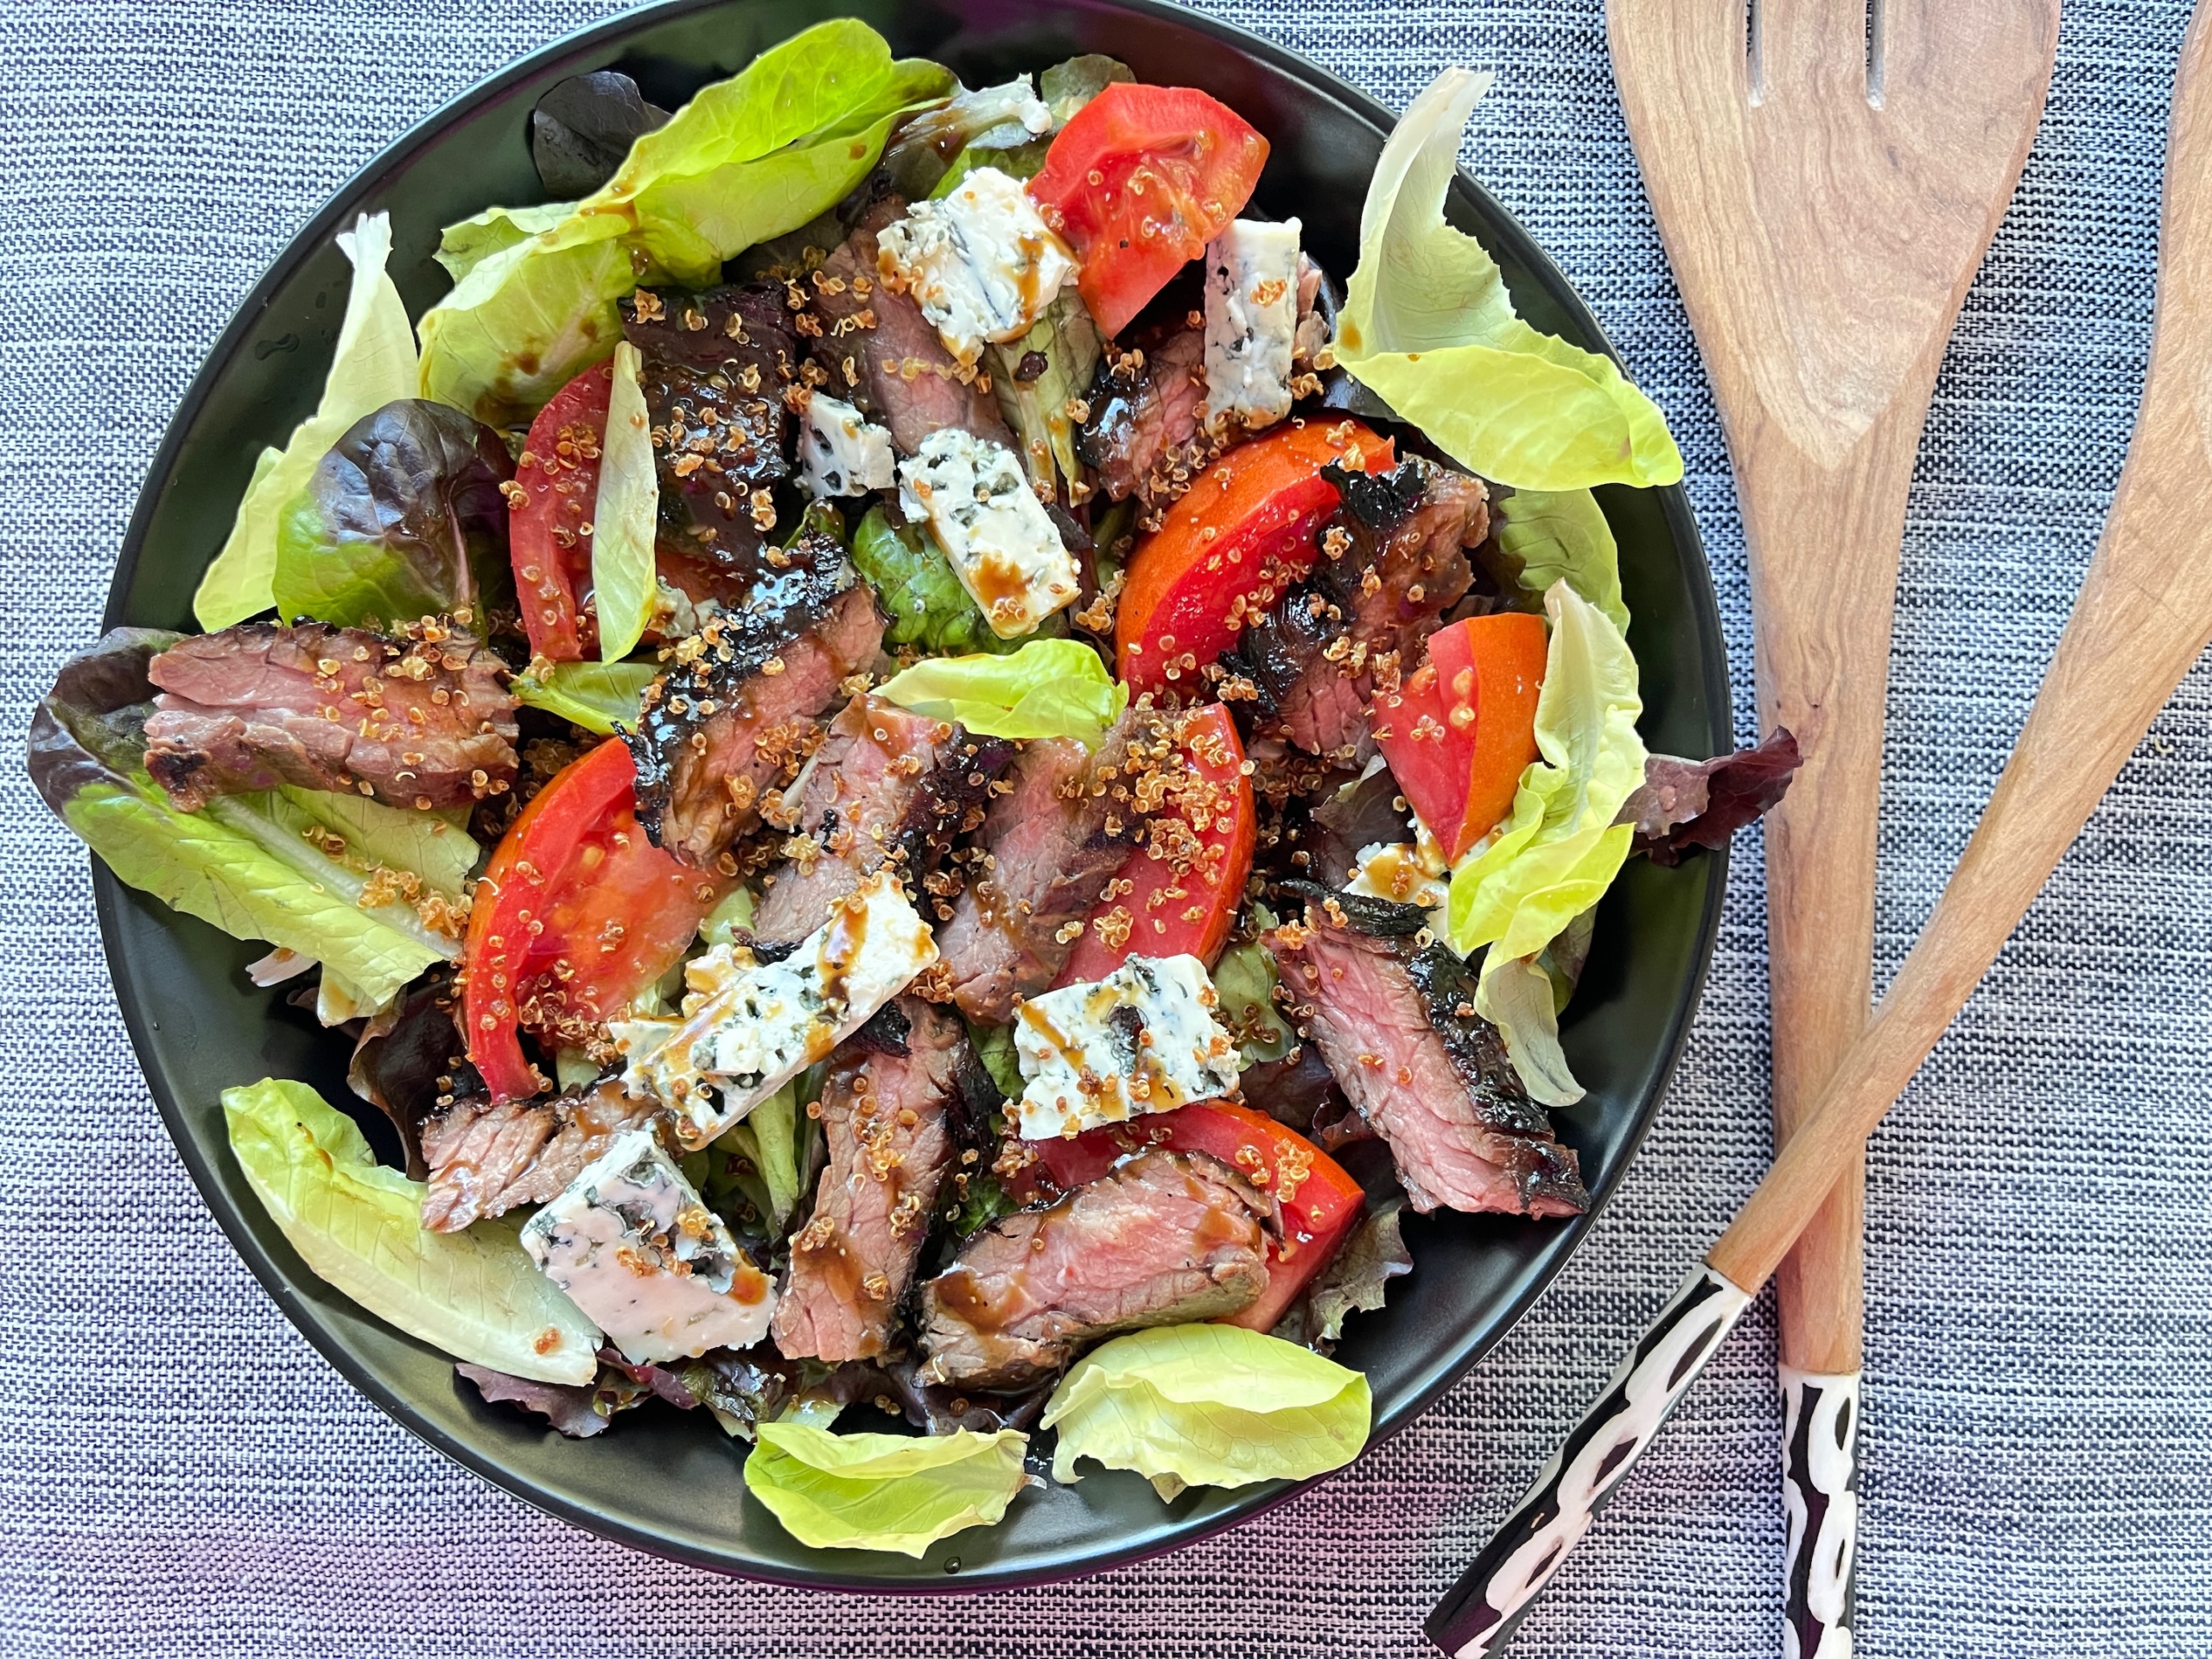 Black and Blue Steak Salad with Quinoa Crunchies